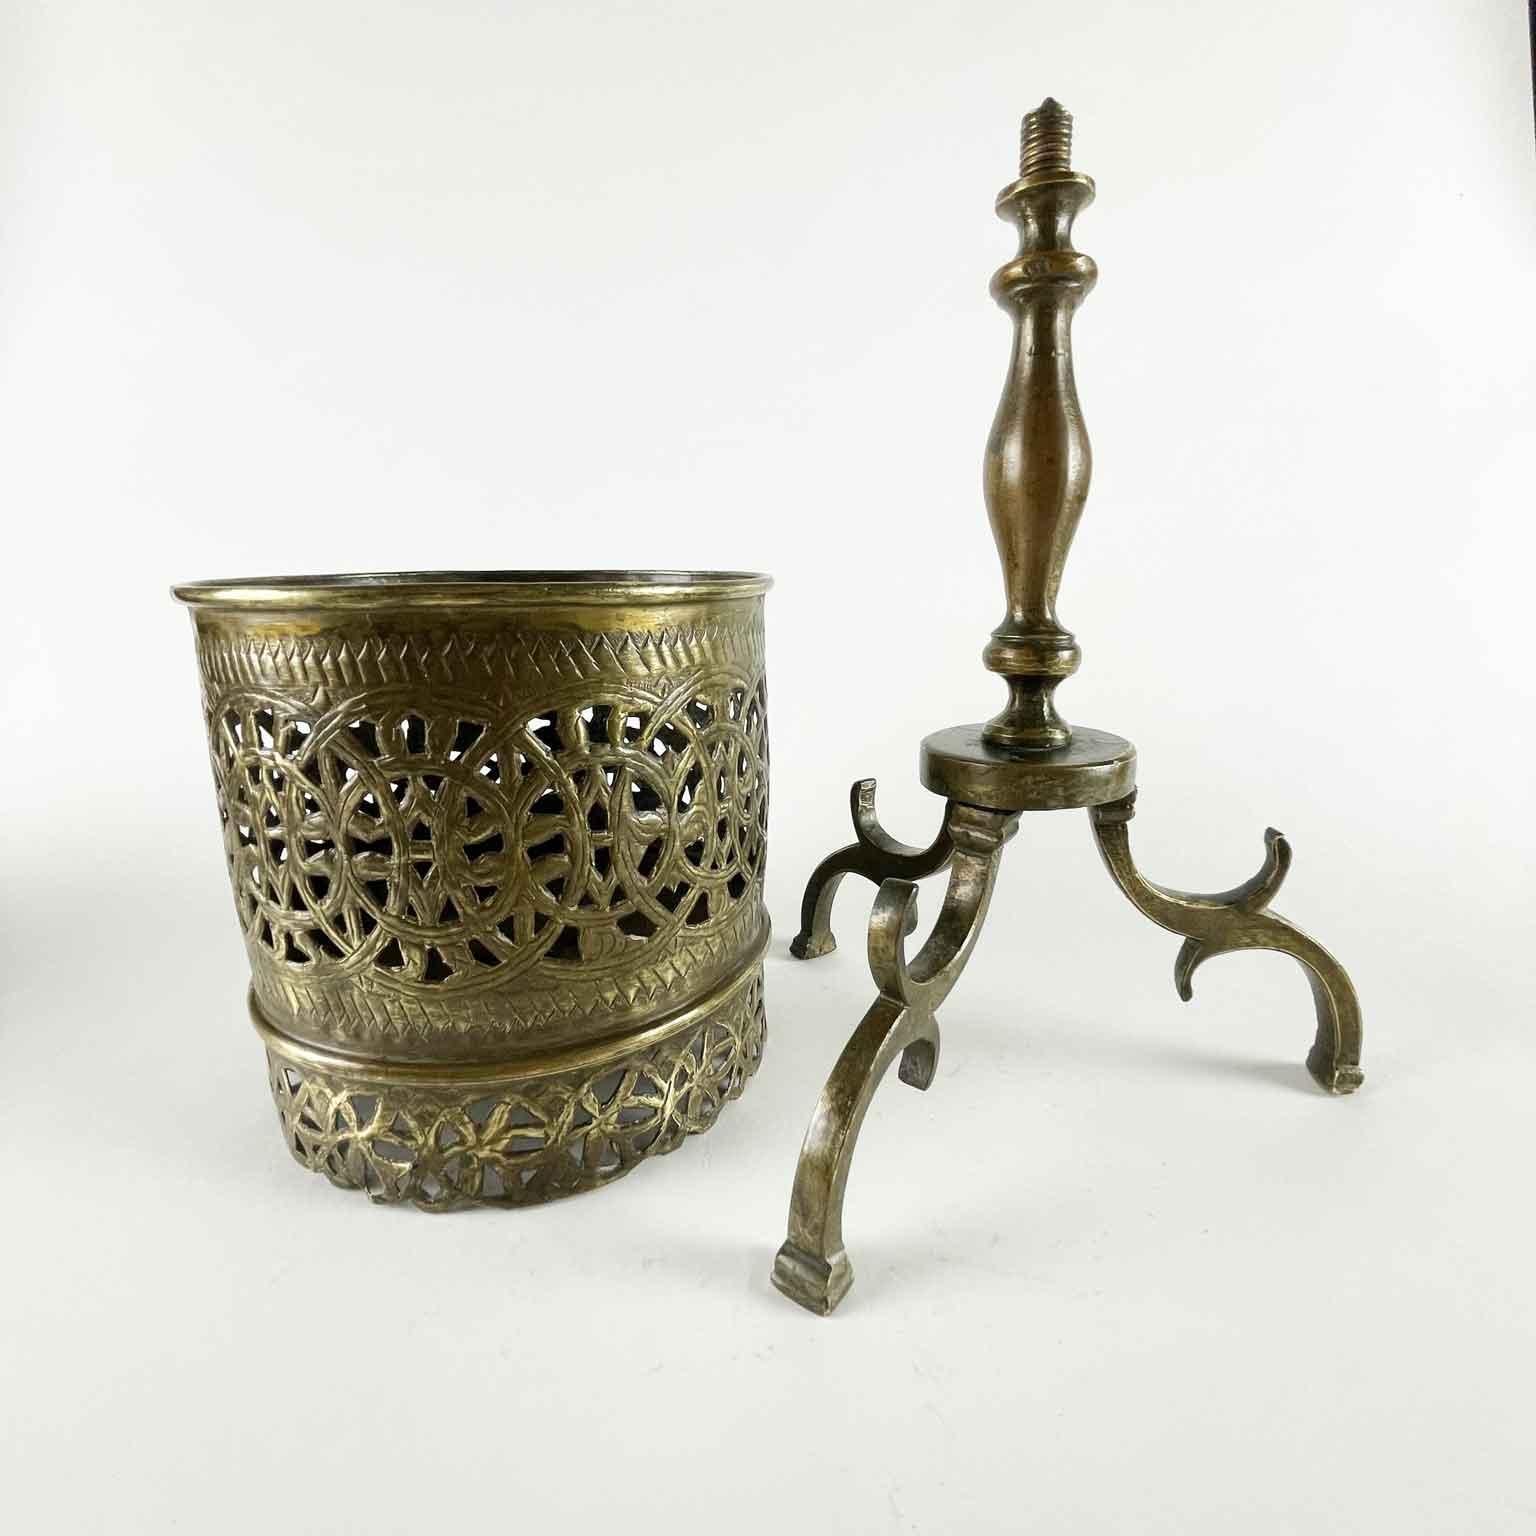 19th century Middle Eastern Brass Brazier standing on tripod base featuring a central turned brass shaft, three cast brass feet at the base, a threaded pin joins the cylindric brazier container made of pierced and embossed sheet metal. Inside there